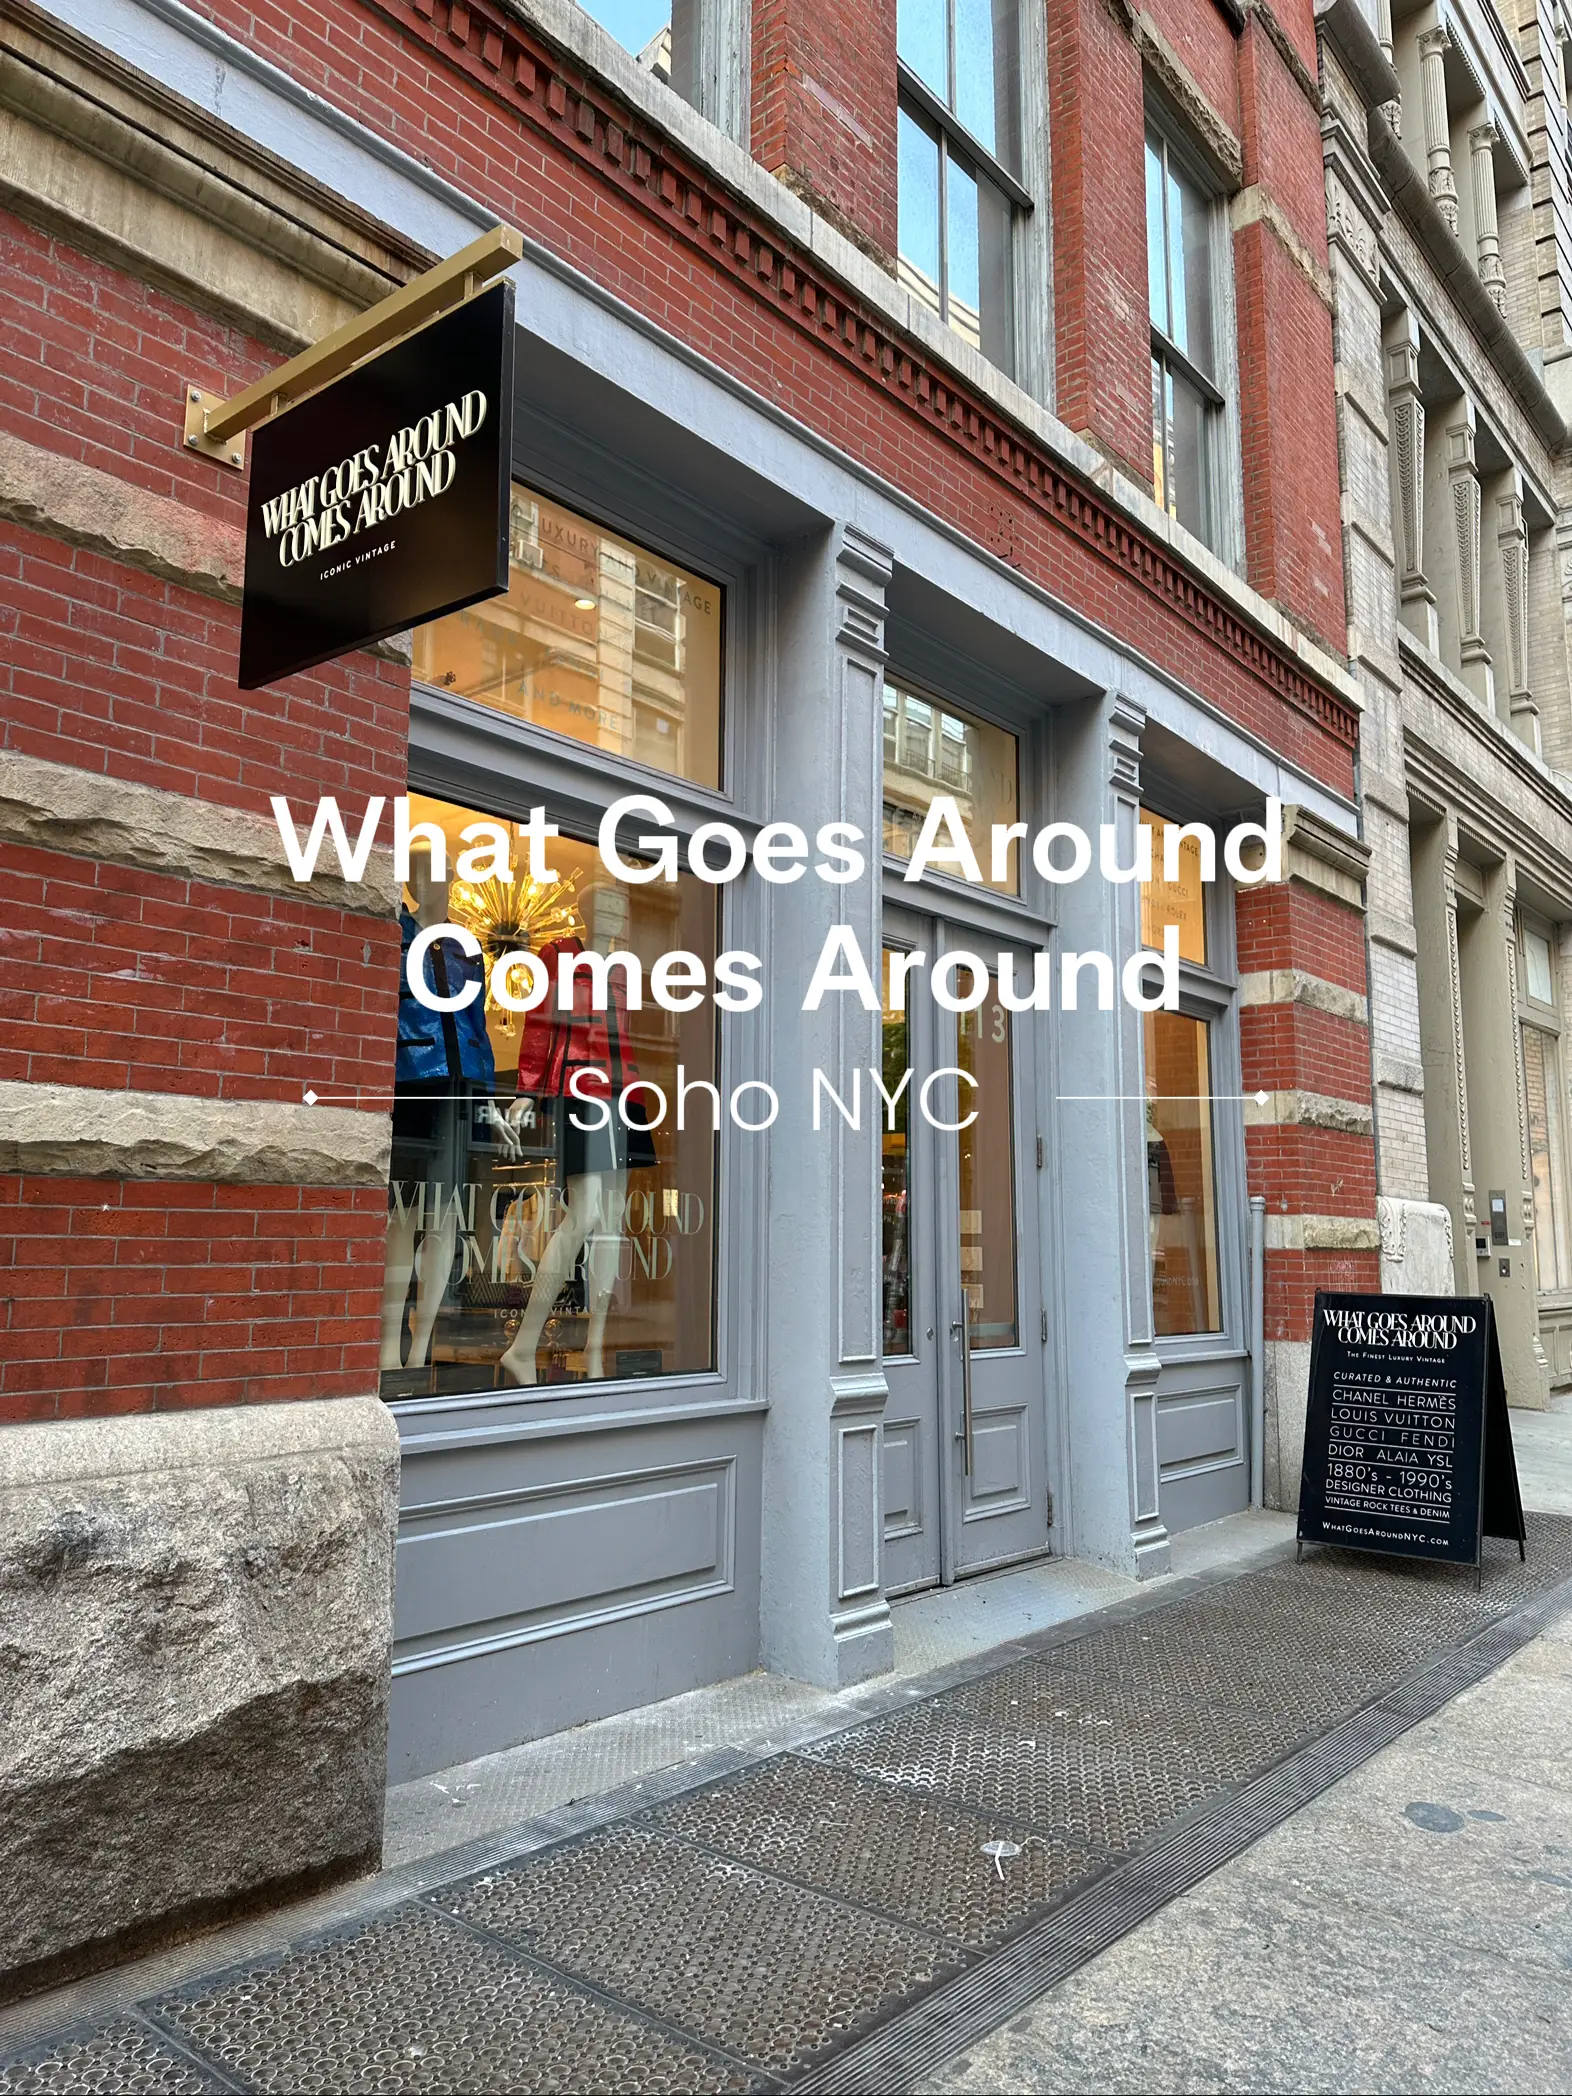 What Goes Around Comes Around, Soho NYC, Gallery posted by Modeetchien